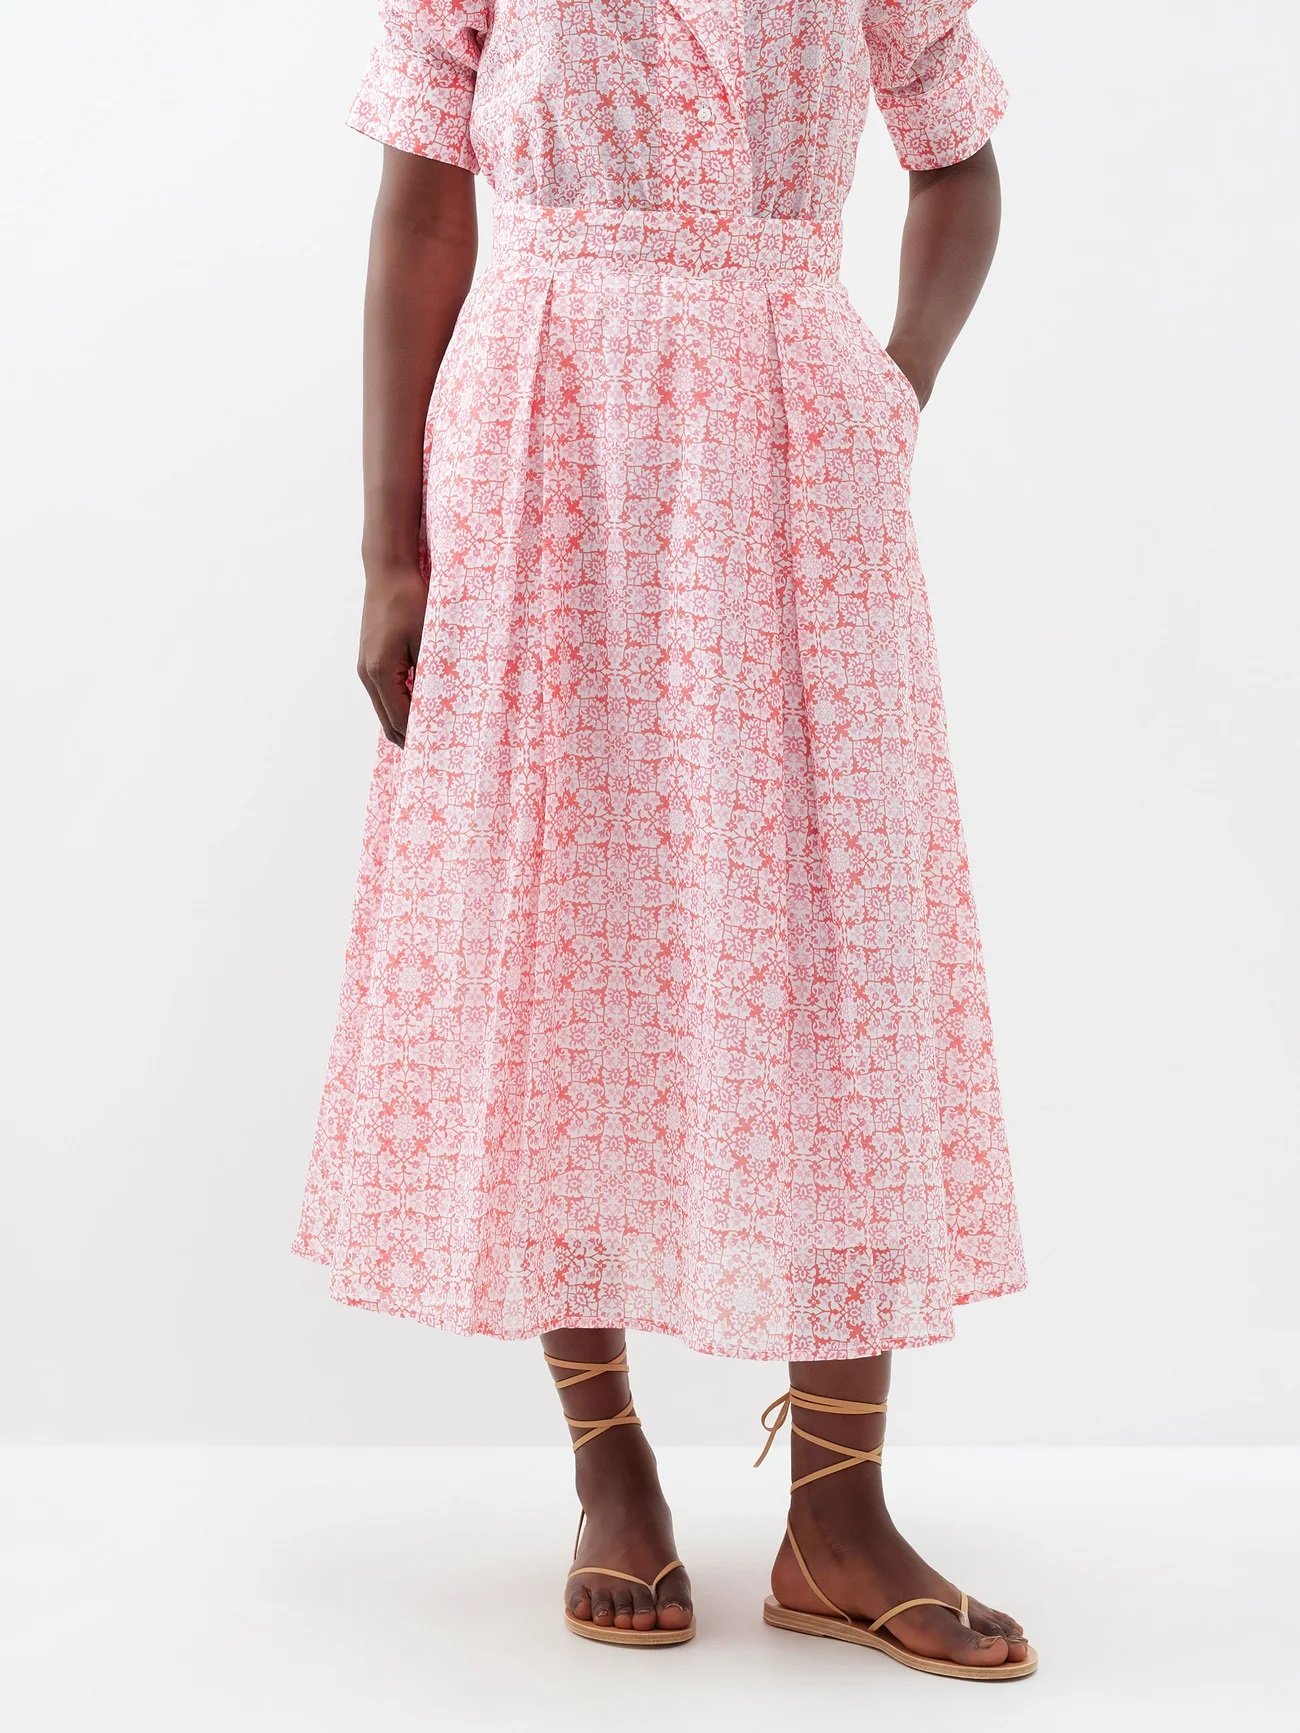 Thierry Colson Wynona Skirt in Candy Pink.jpg